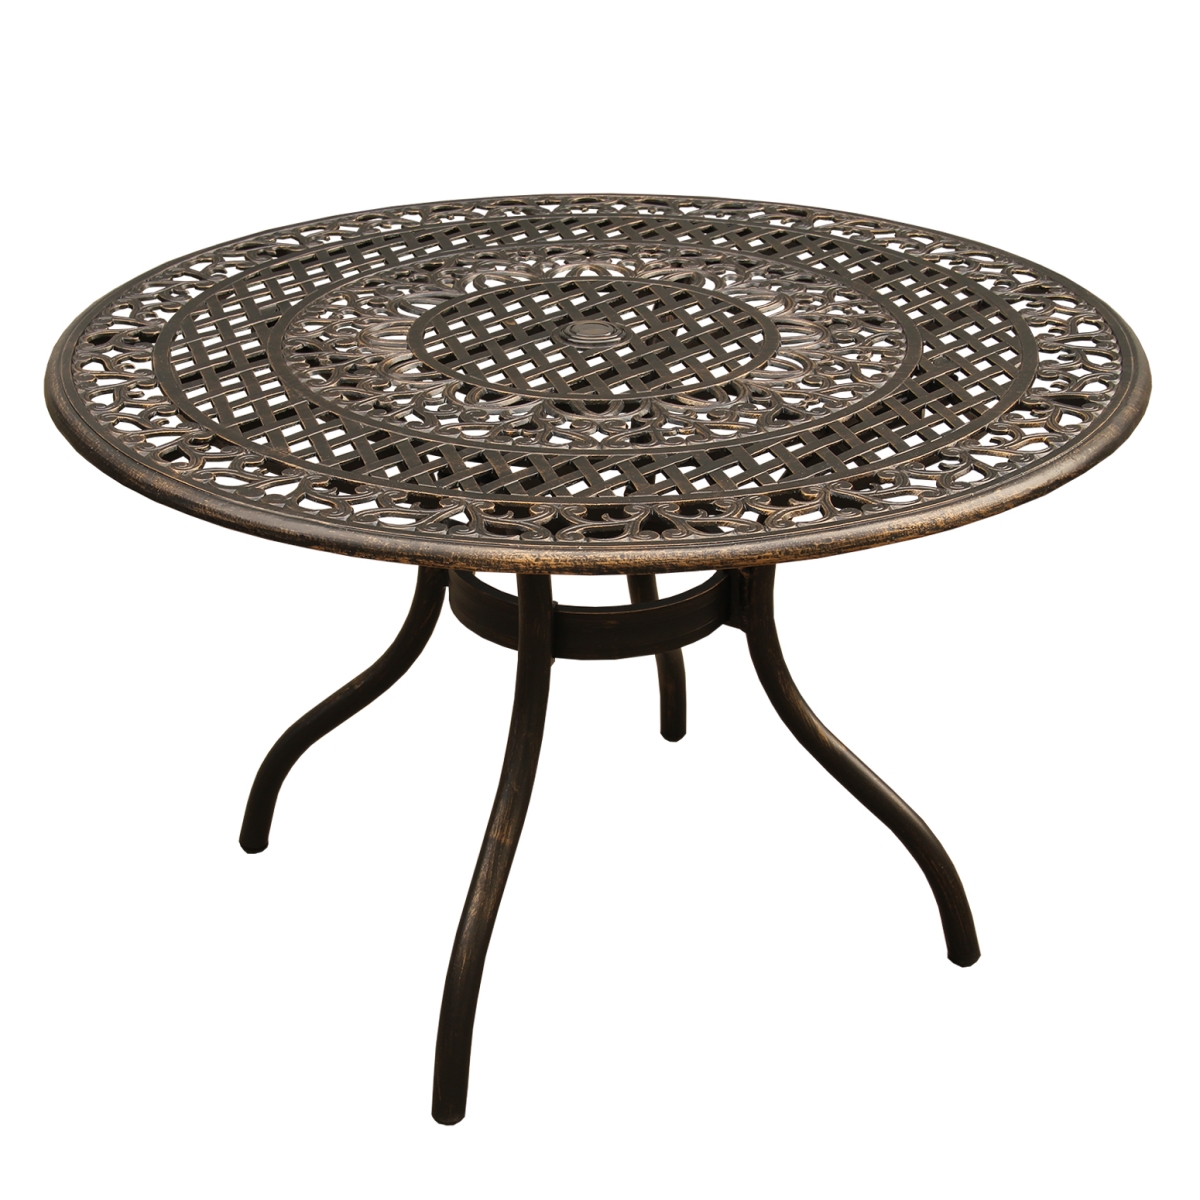 Oakland Living 2666-round-48-ornate-table-bz 48 In. Ornate Traditional Outdoor Mesh Lattice Aluminium Round Dining Table, Bronze